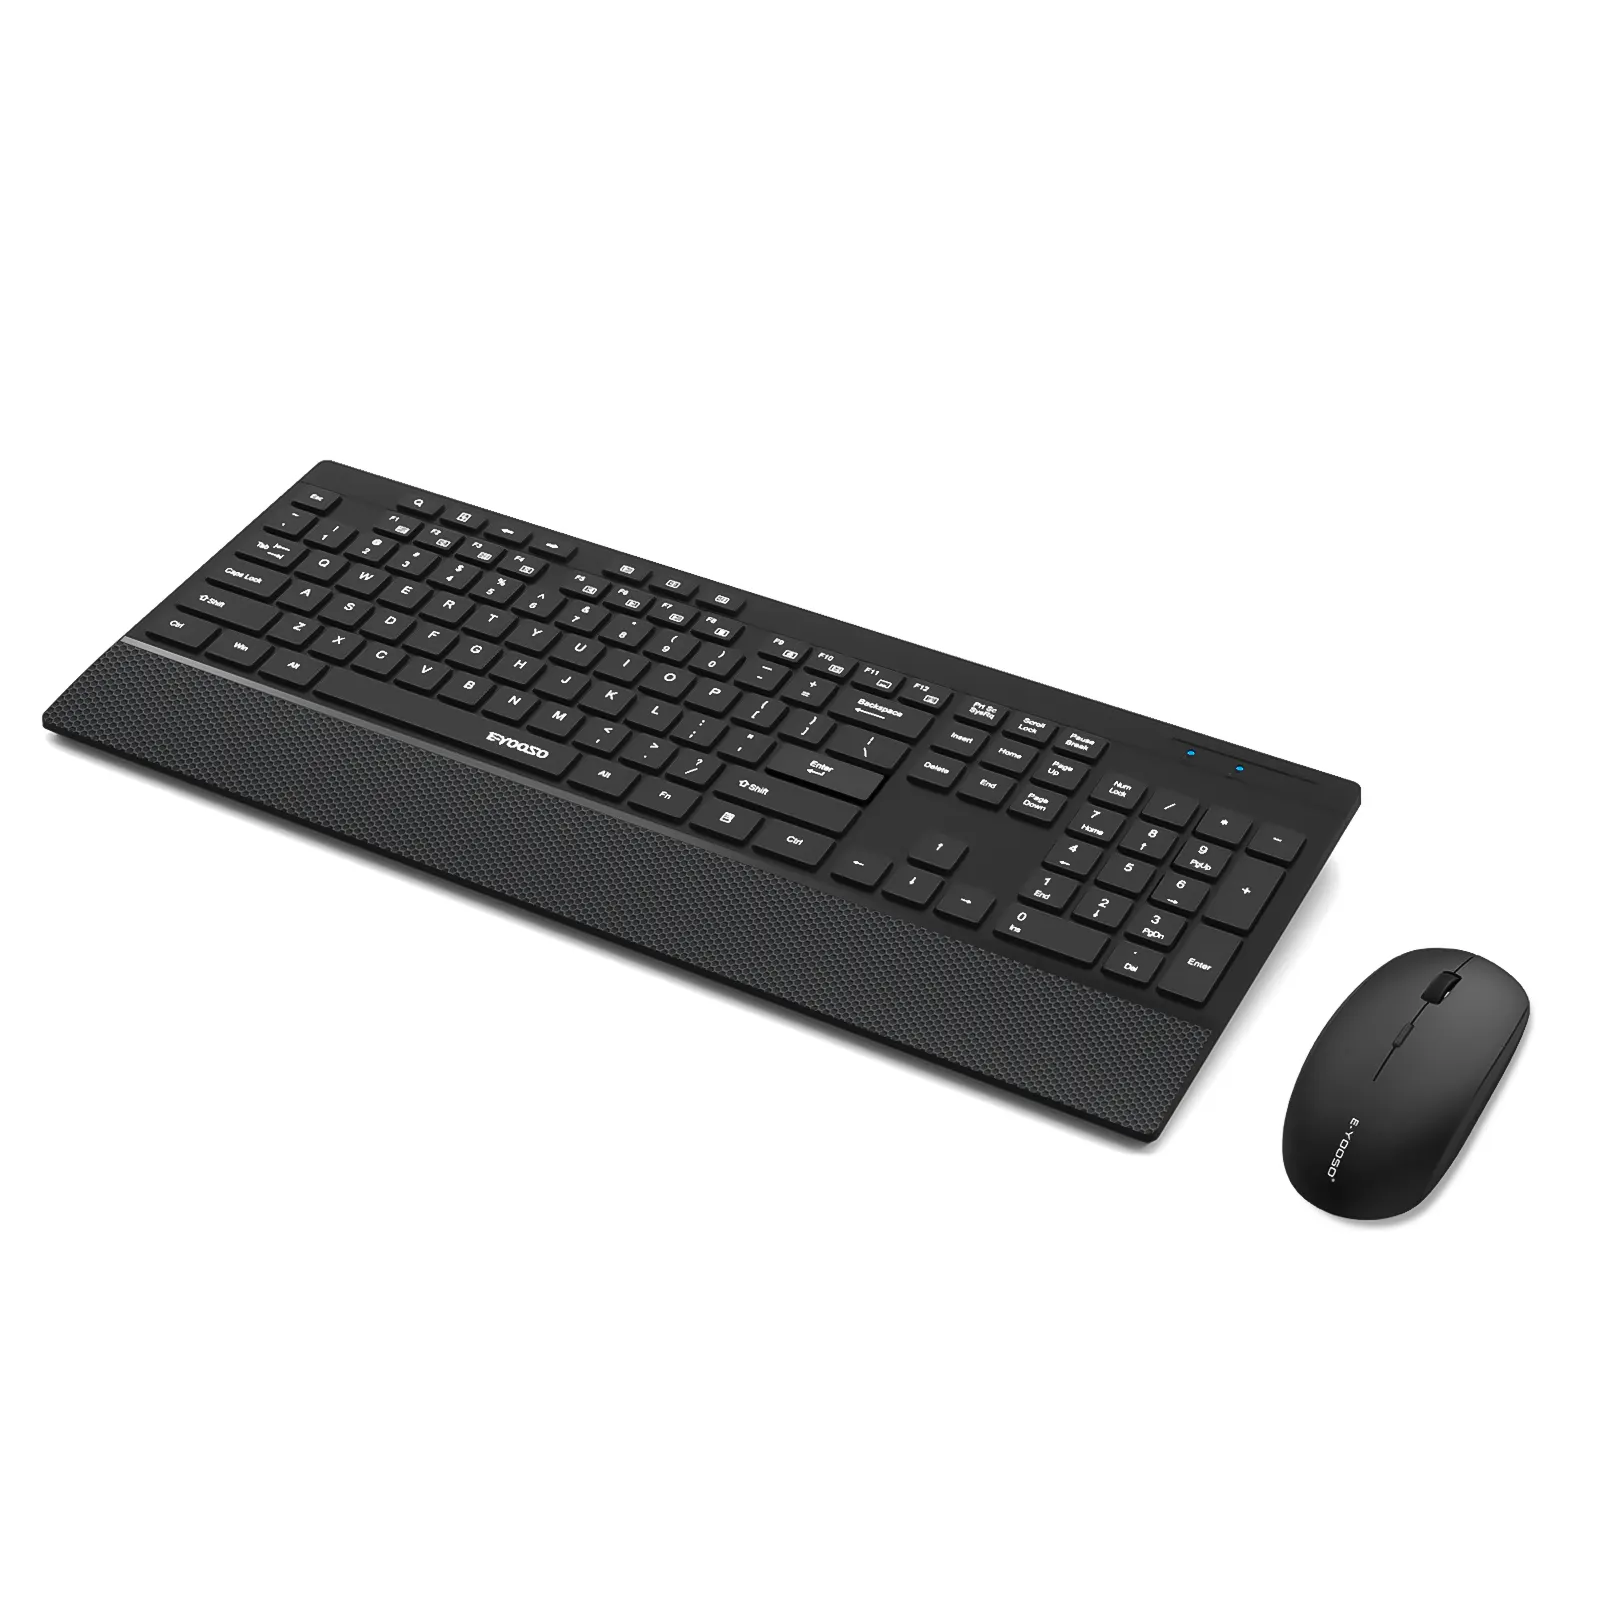 Ergonomic Design 2.4G Wireless Keyboard And Mouse Combo Home Notebook Desktop Computer Keyboard Mouse Set